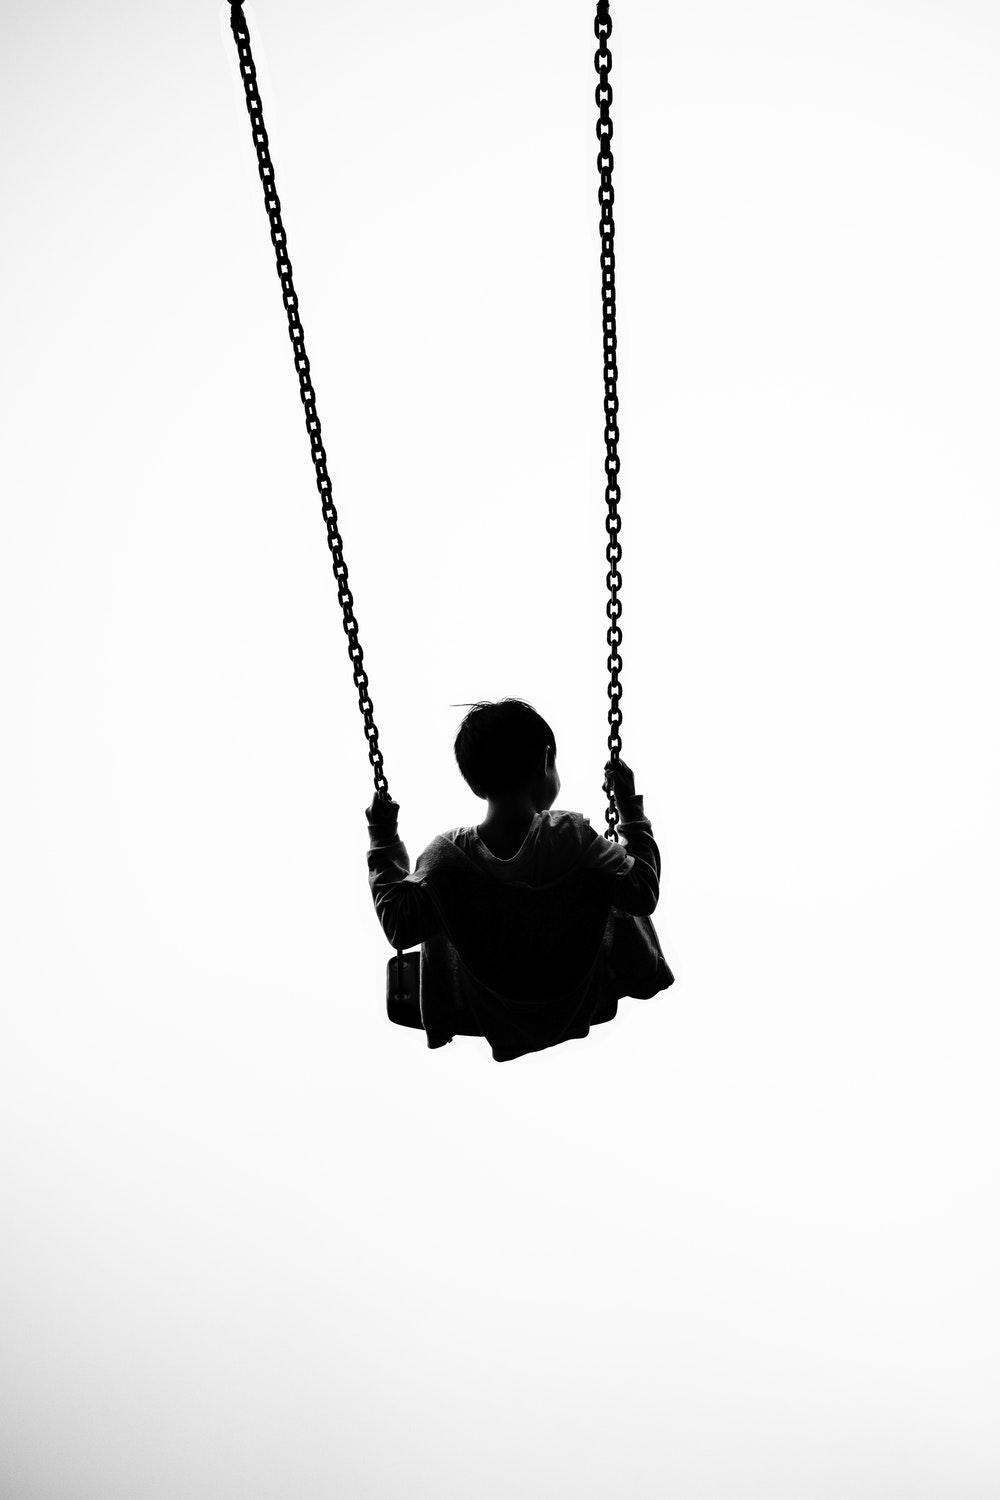 Swing Picture. Download Free Image